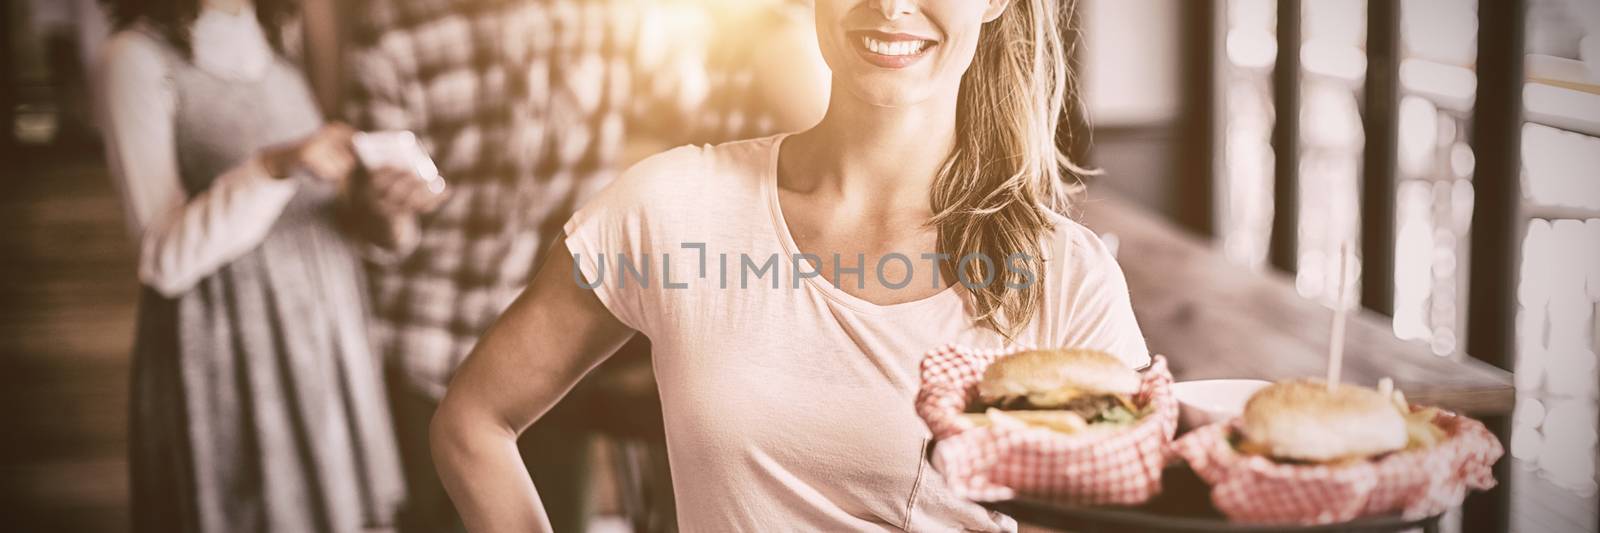 Portrait of smiling young waitress serving burger with customers in background at restaurant